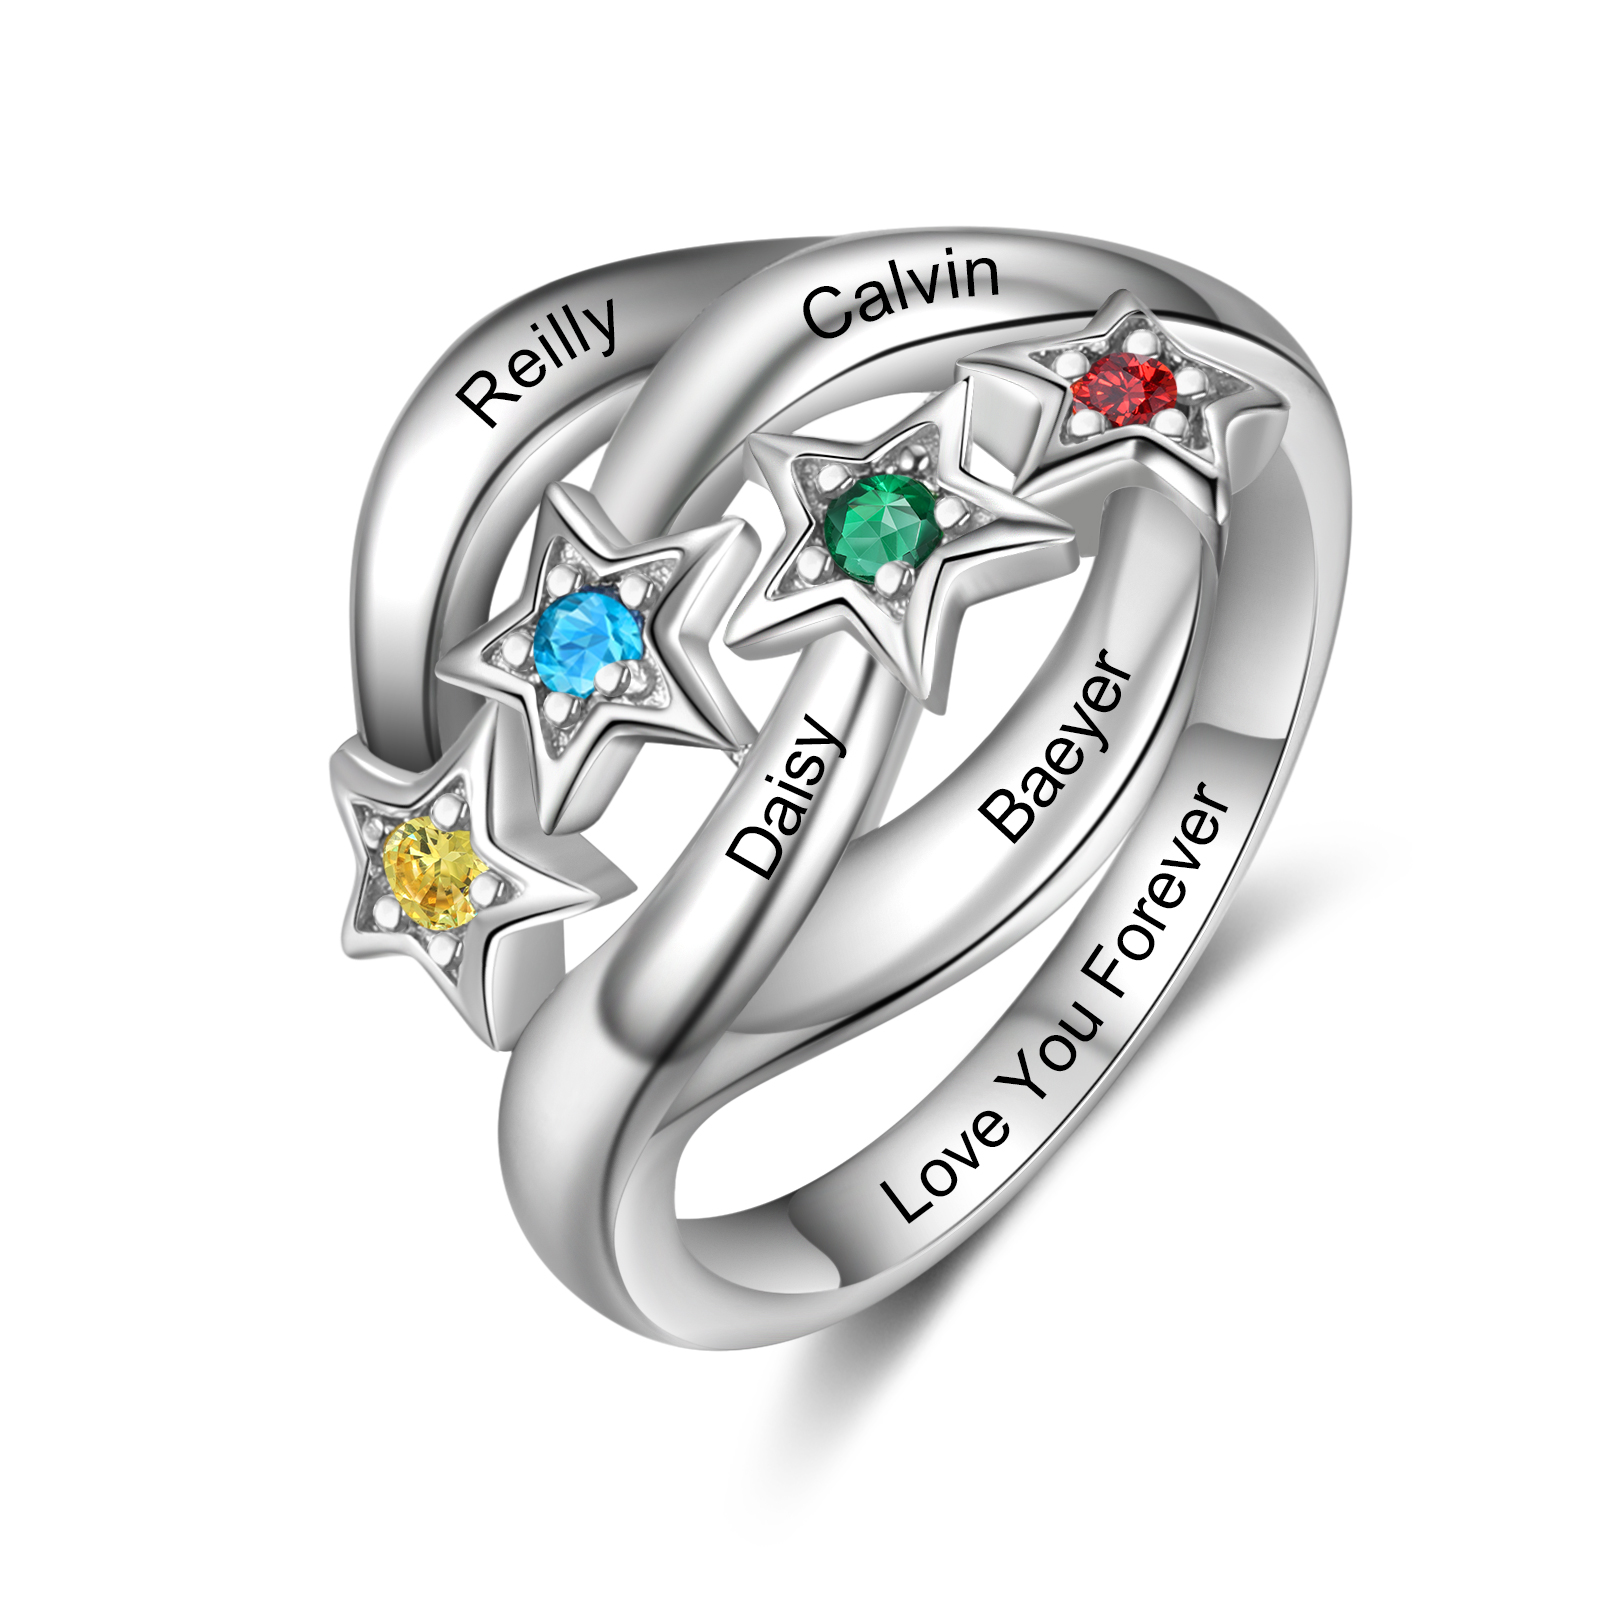 Personalized Star Ring With 4 Birthstones Engraved Names Ring Gift For Women